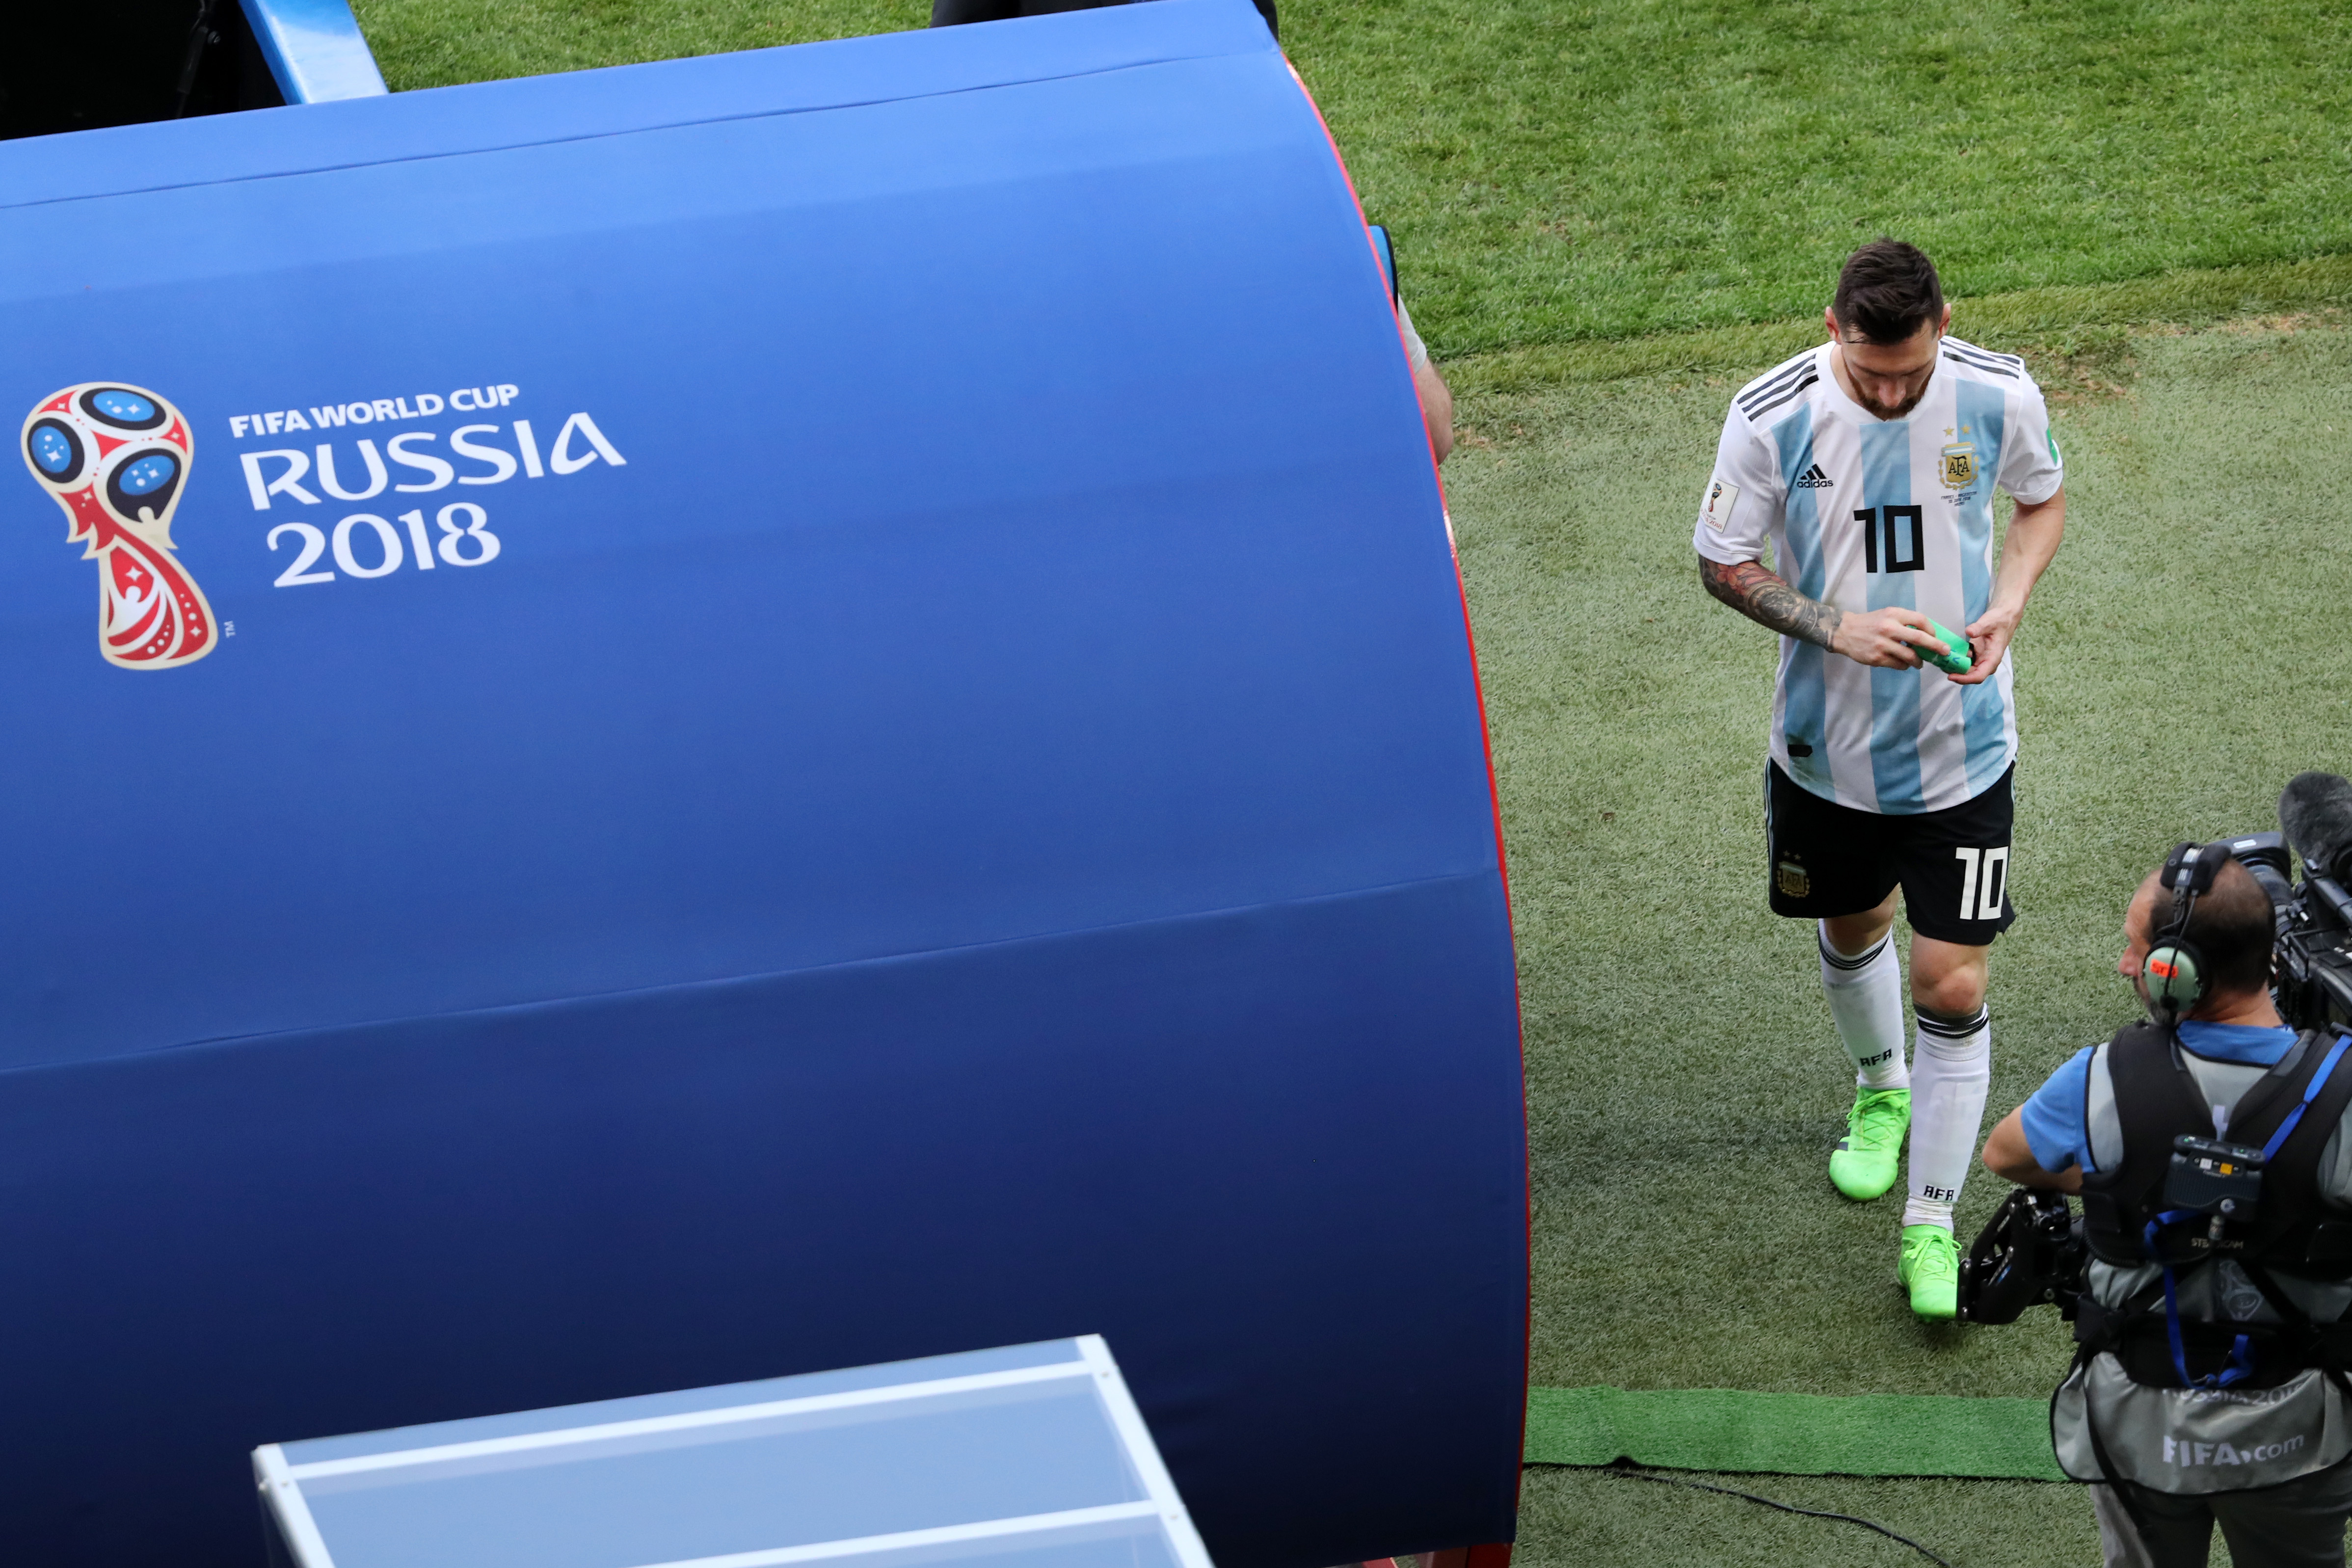 Will Messi Retire From International Soccer Before World Cup 2022?